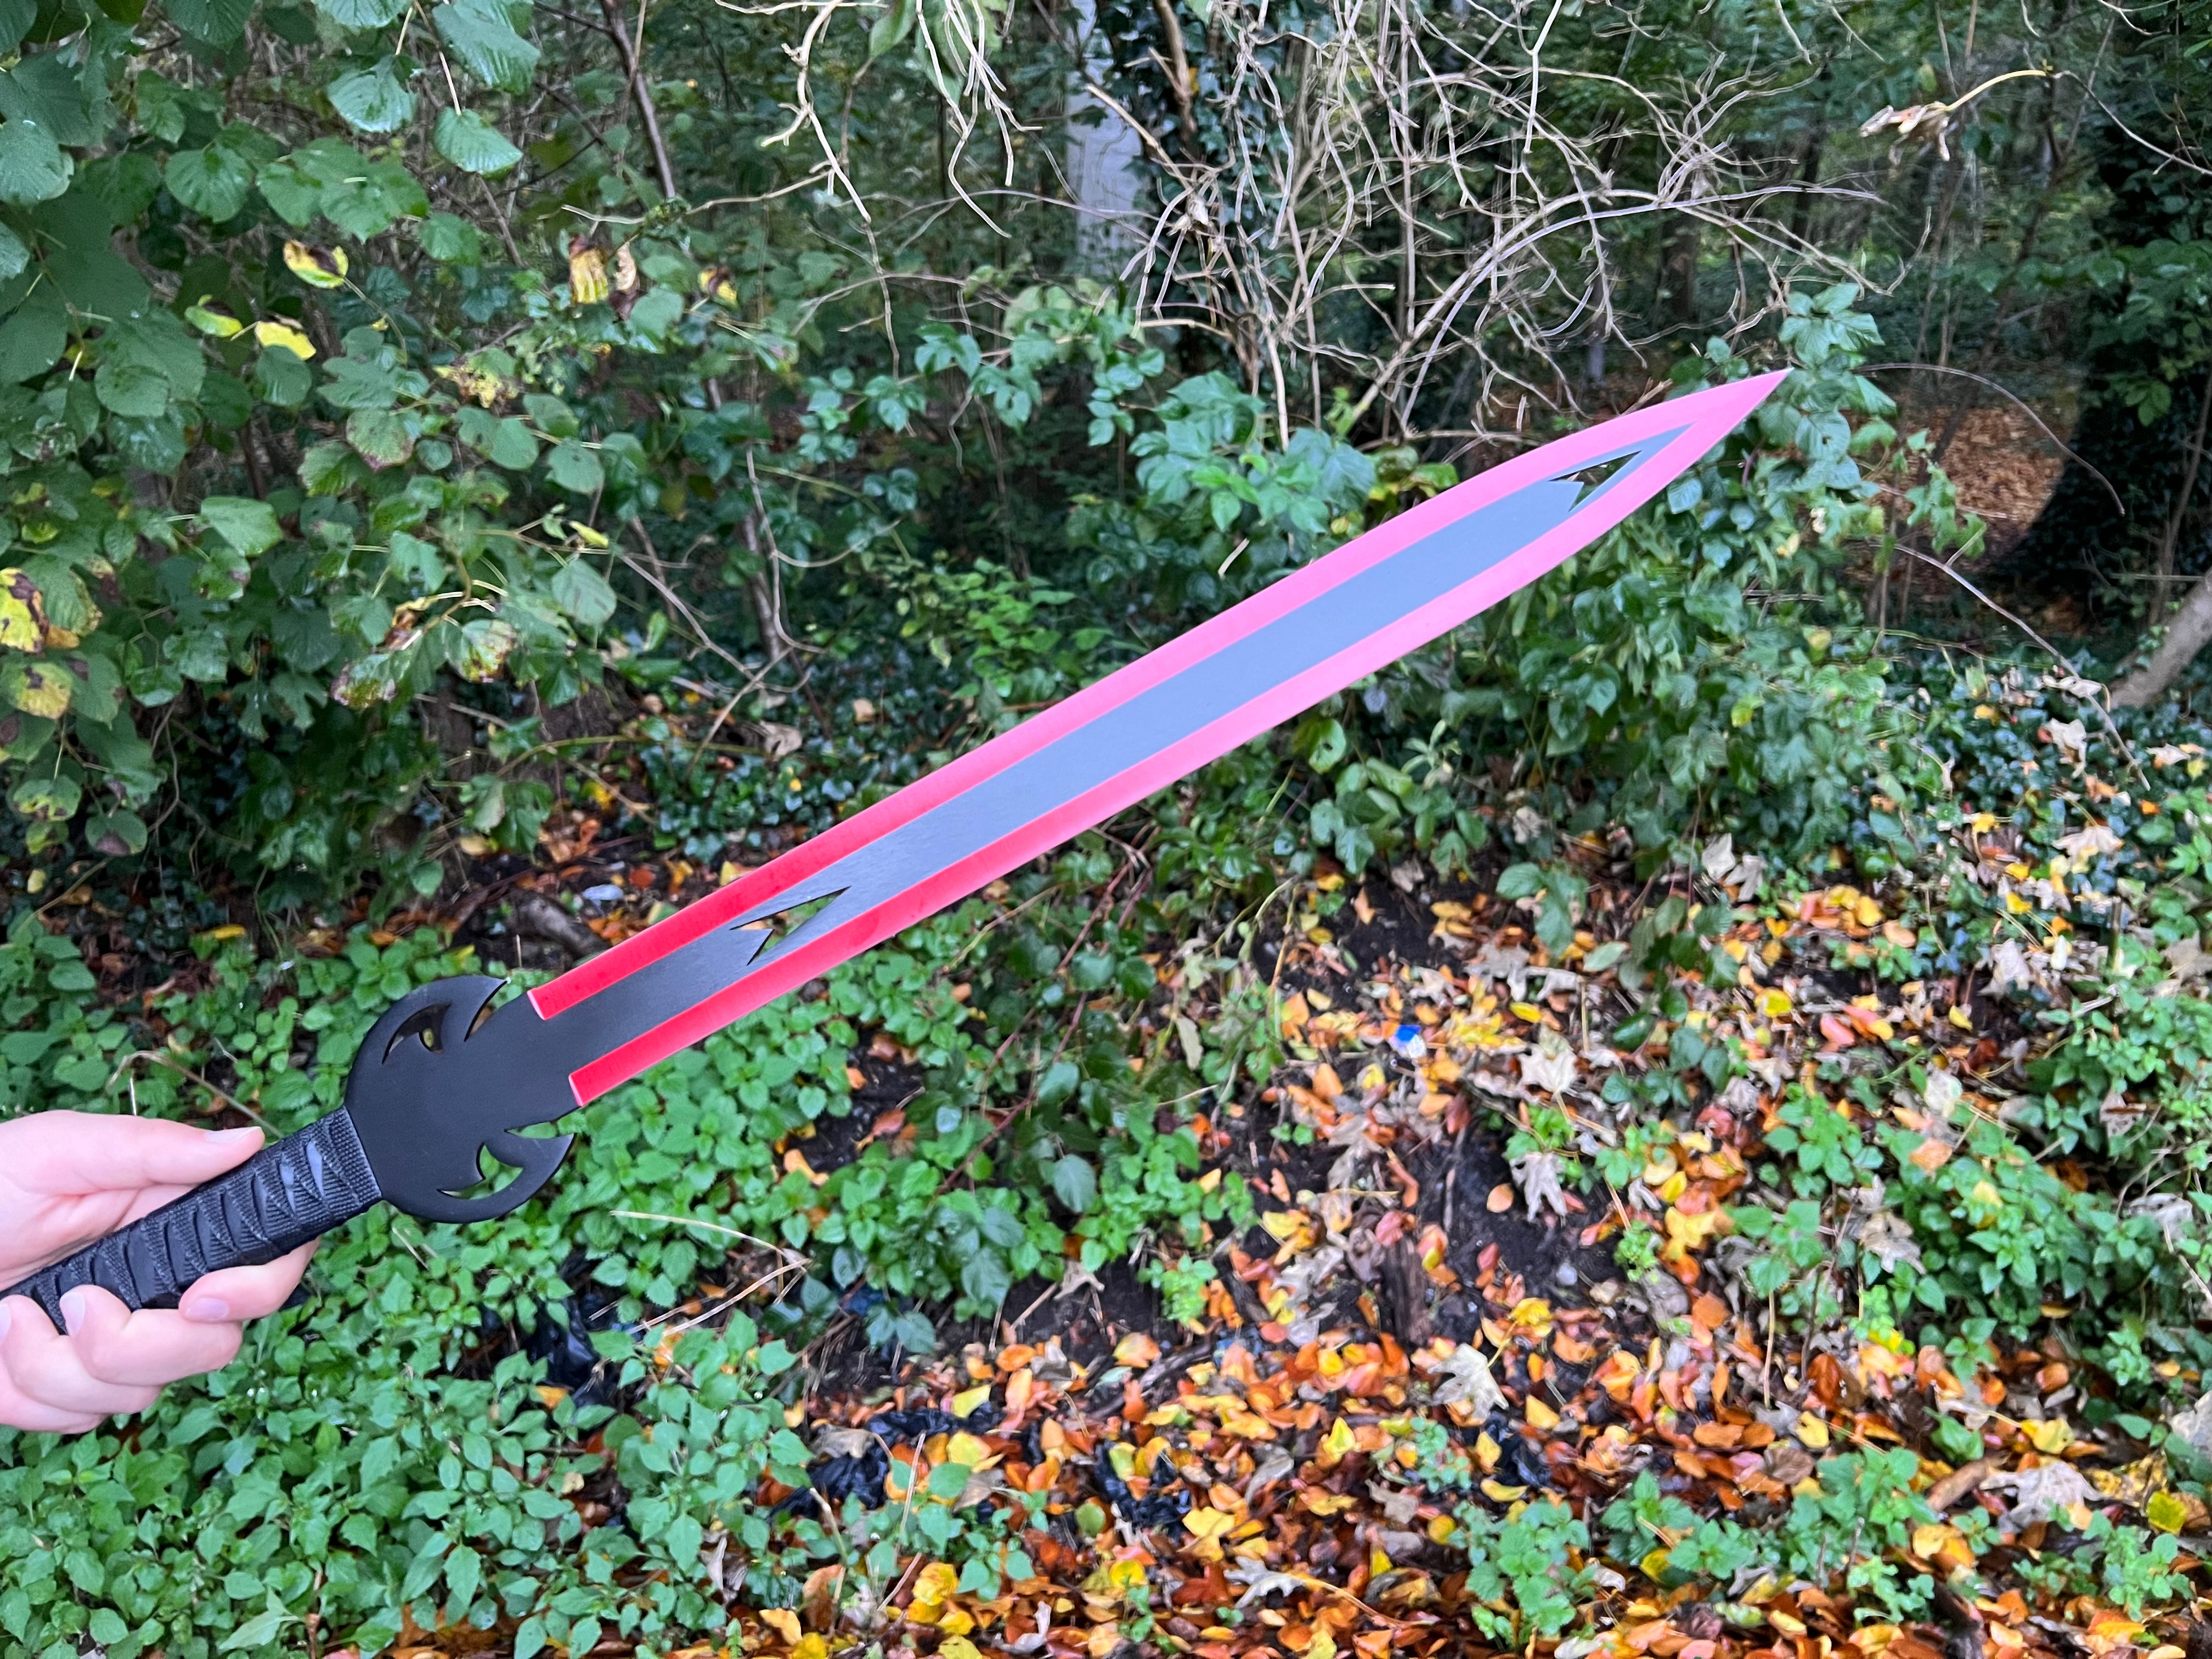 Back Sword "Crimson Blade"-Red wrapped with blue/black coated blade-Incl.  Nylon sheath with carrying strap